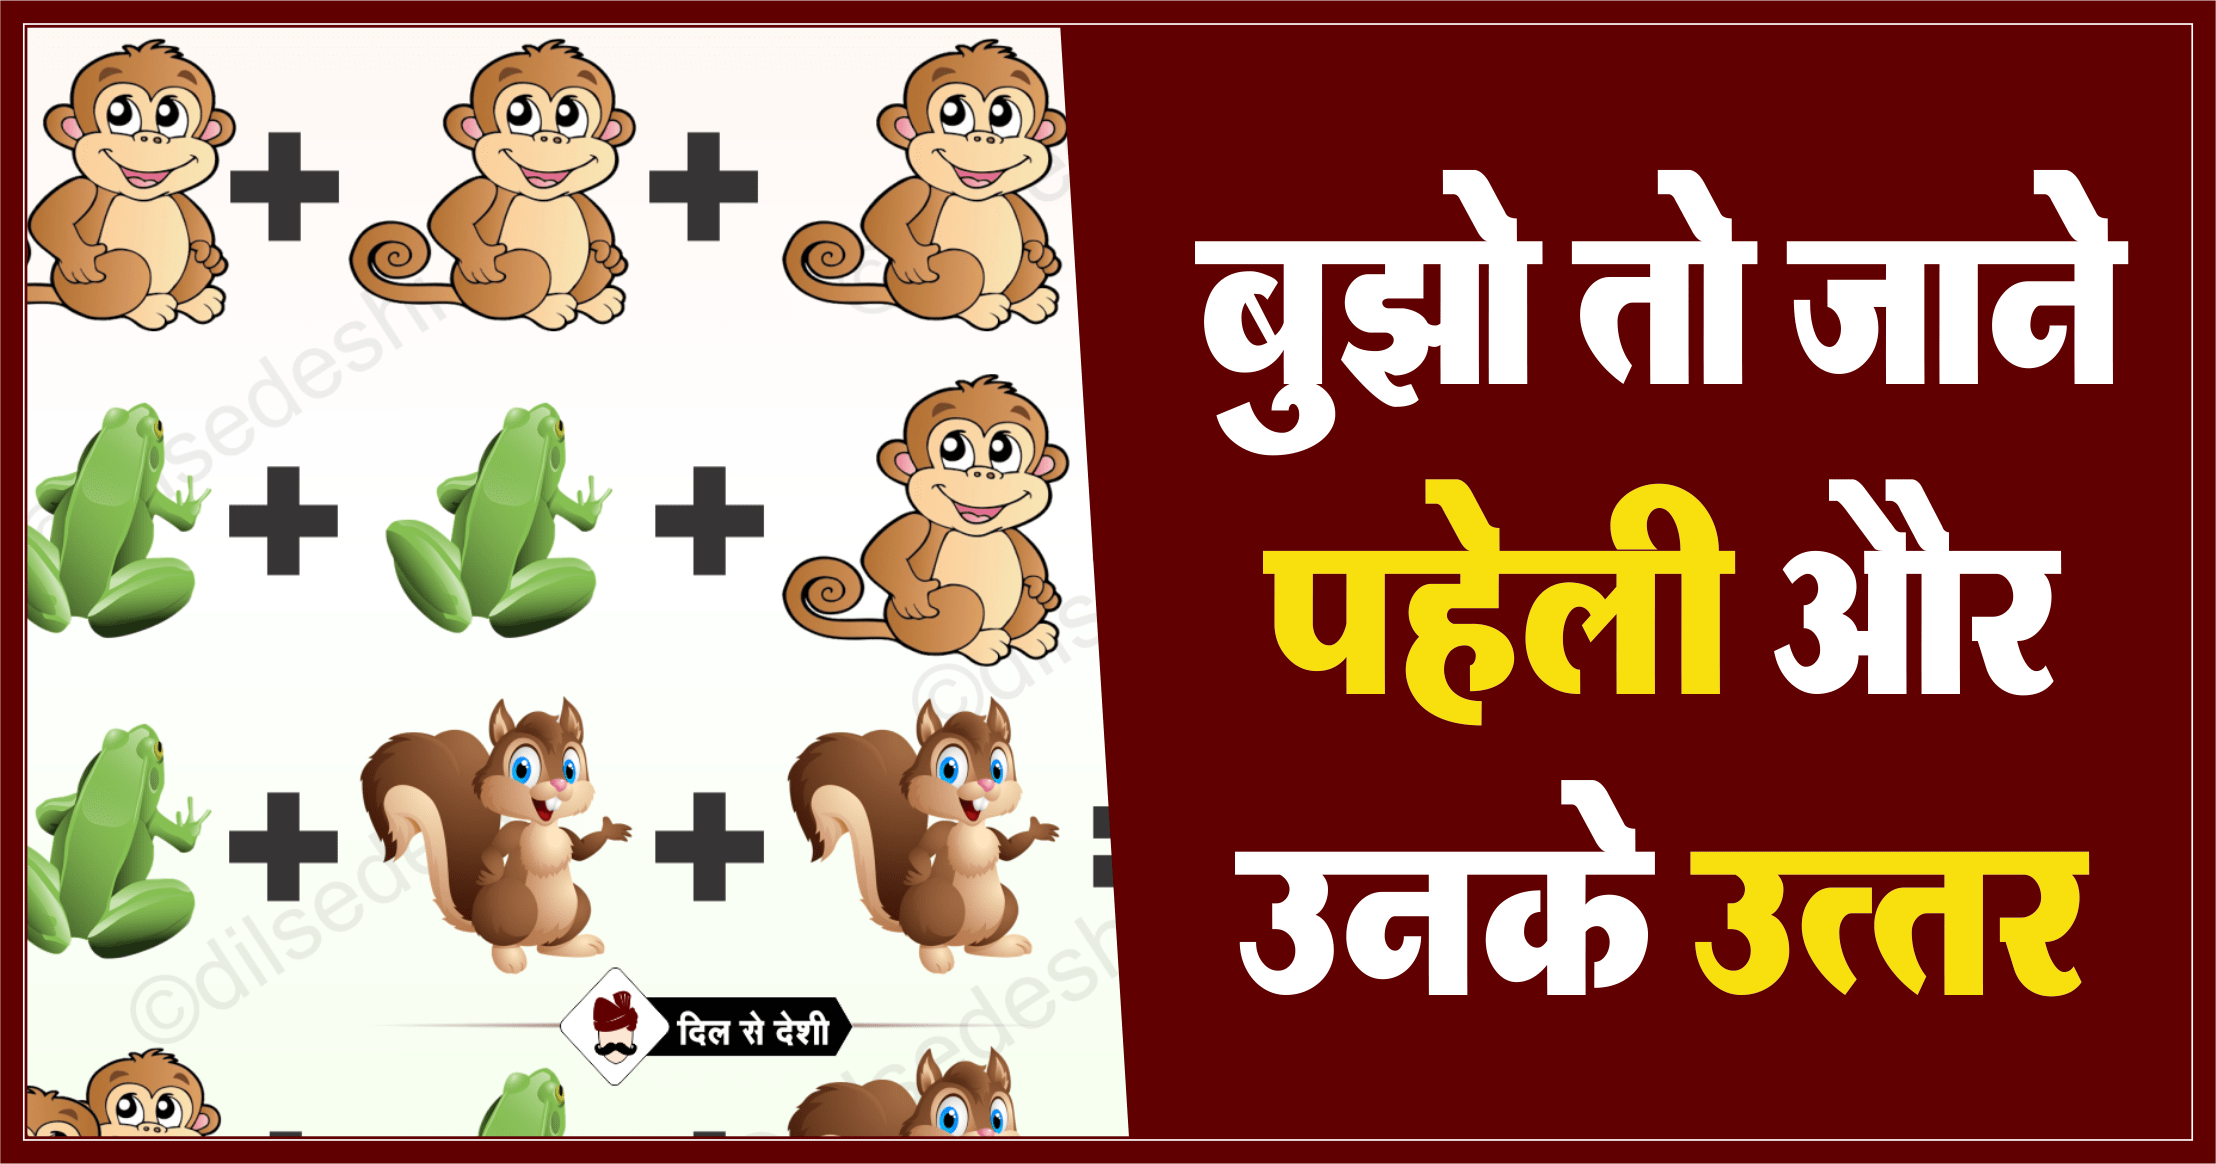 Monkey, Frog and Squirrel Logical Puzzle Quiz Questions Answer